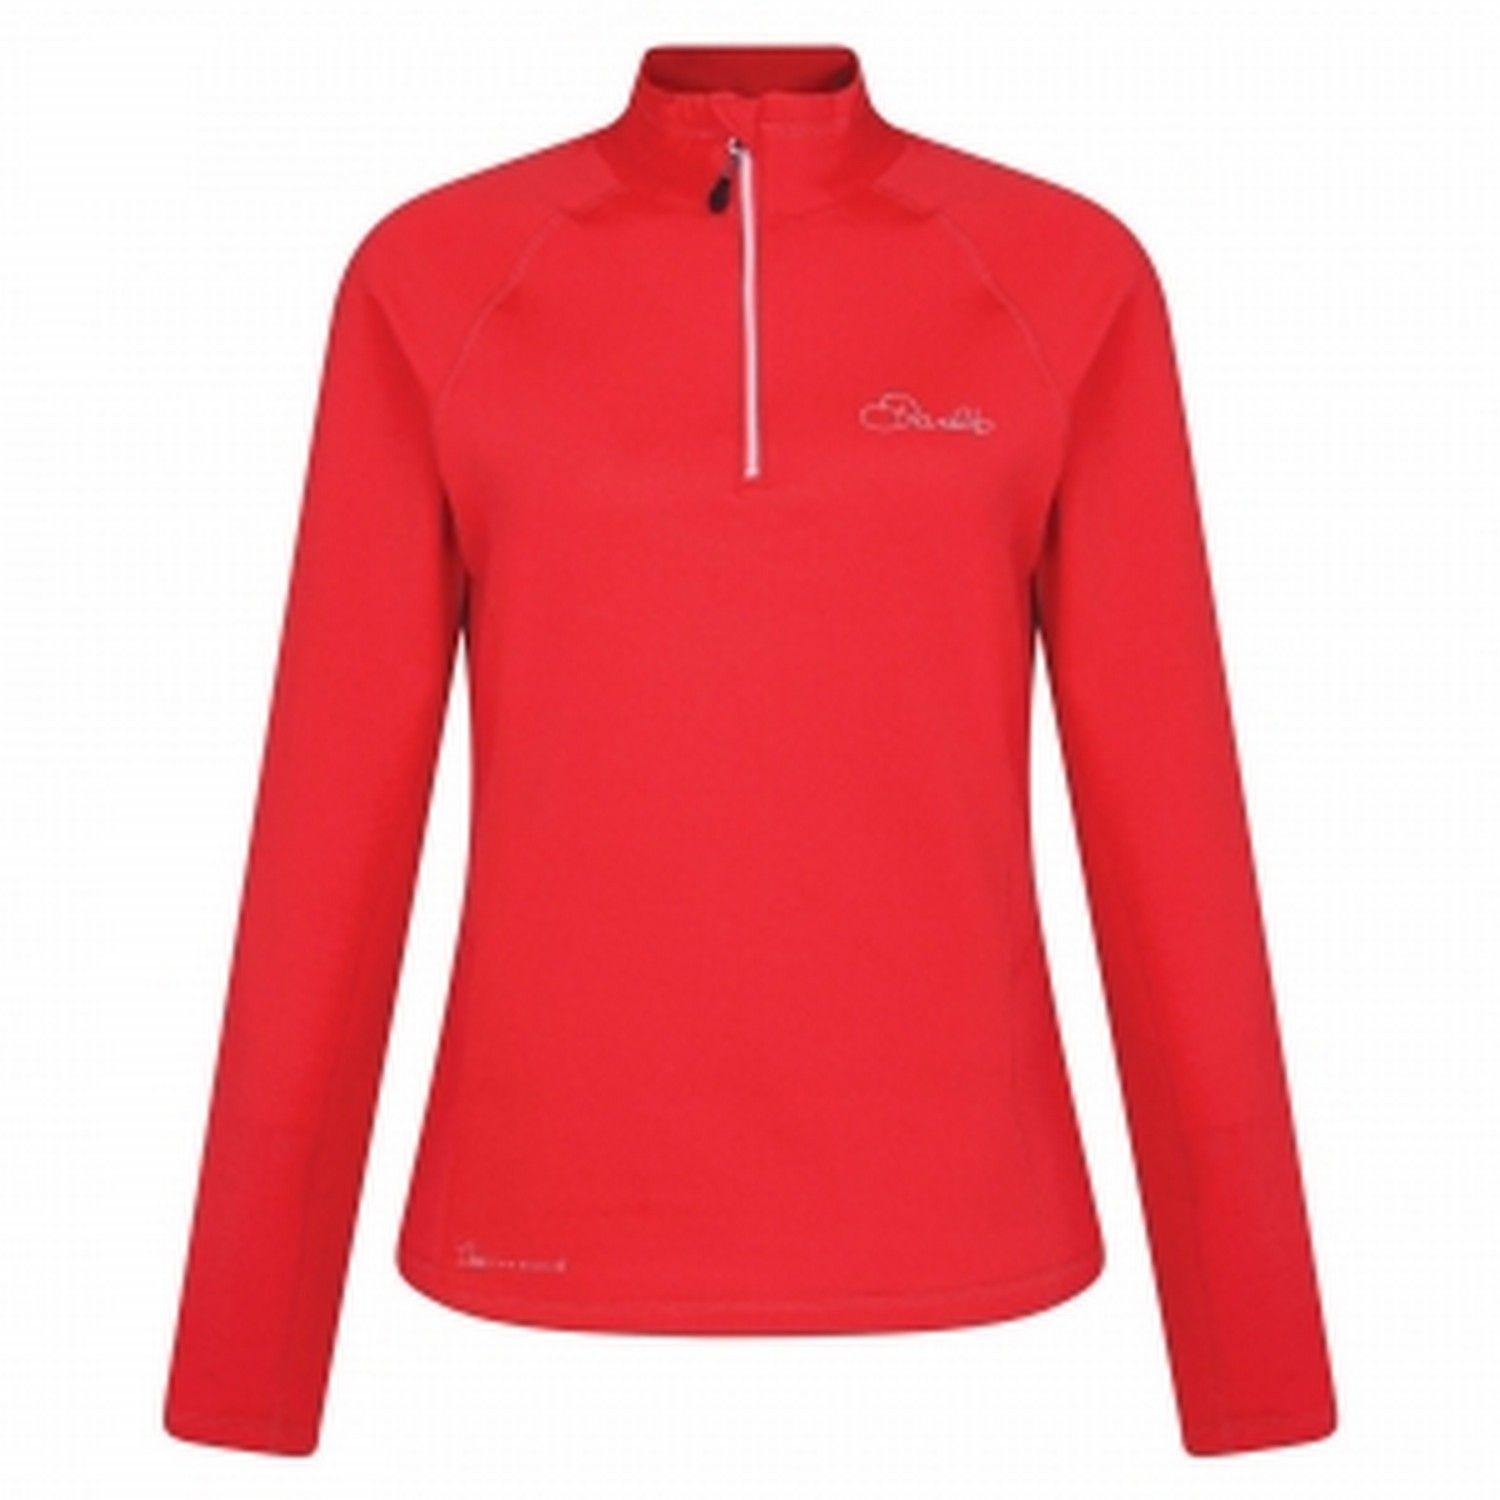 88% polyester, 12% elastane. Womens lightweight pullover. Raglan sleeves for enhanced movement and a low-bulk, sleek design. Ilus Core warm backed knitted stretch fabric - 200gsm. Quick drying. Half zip. Inner zip & chin guard. Dare 2B Womens Sizing (bust approx): 6 (30in/76cm), 8 (32in/81cm), 10 (34in/86cm), 12 (36in/92cm), 14 (38in/97cm), 16 (40in/102cm), 18 (42in/107cm), 20 (44in/112cm), 22 (46in/117cm), 24 (48in/122cm).